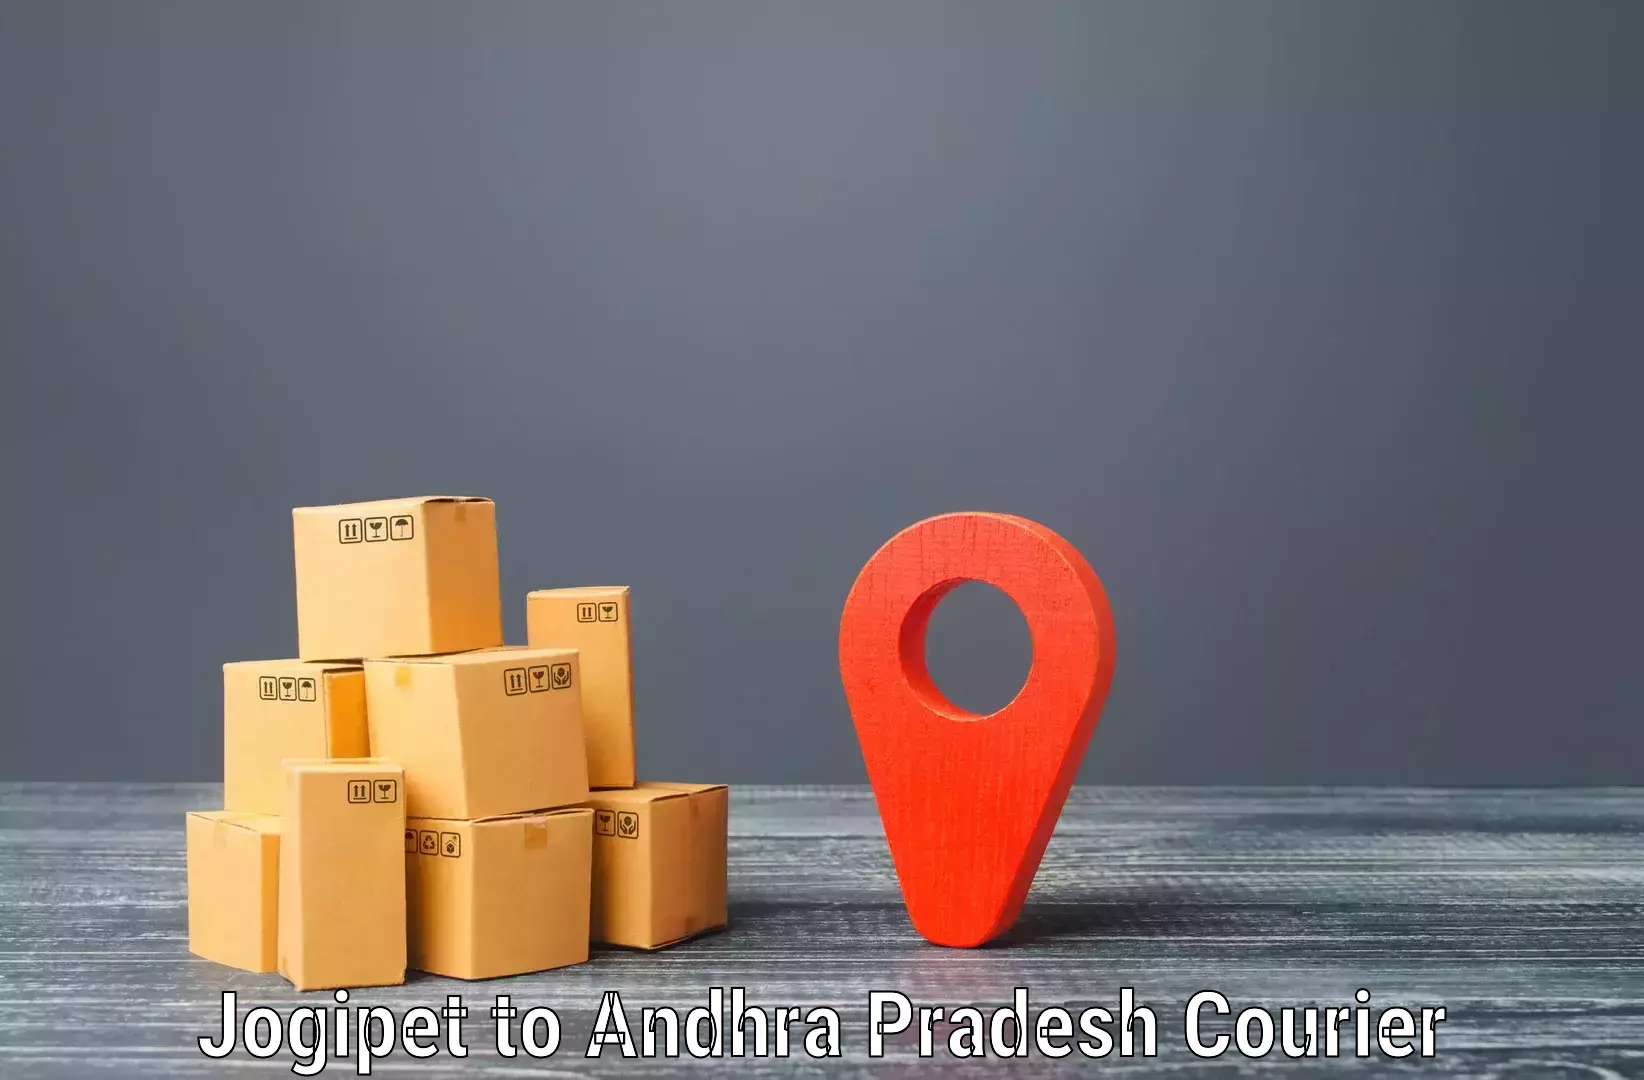 Personal parcel delivery Jogipet to Kanigiri